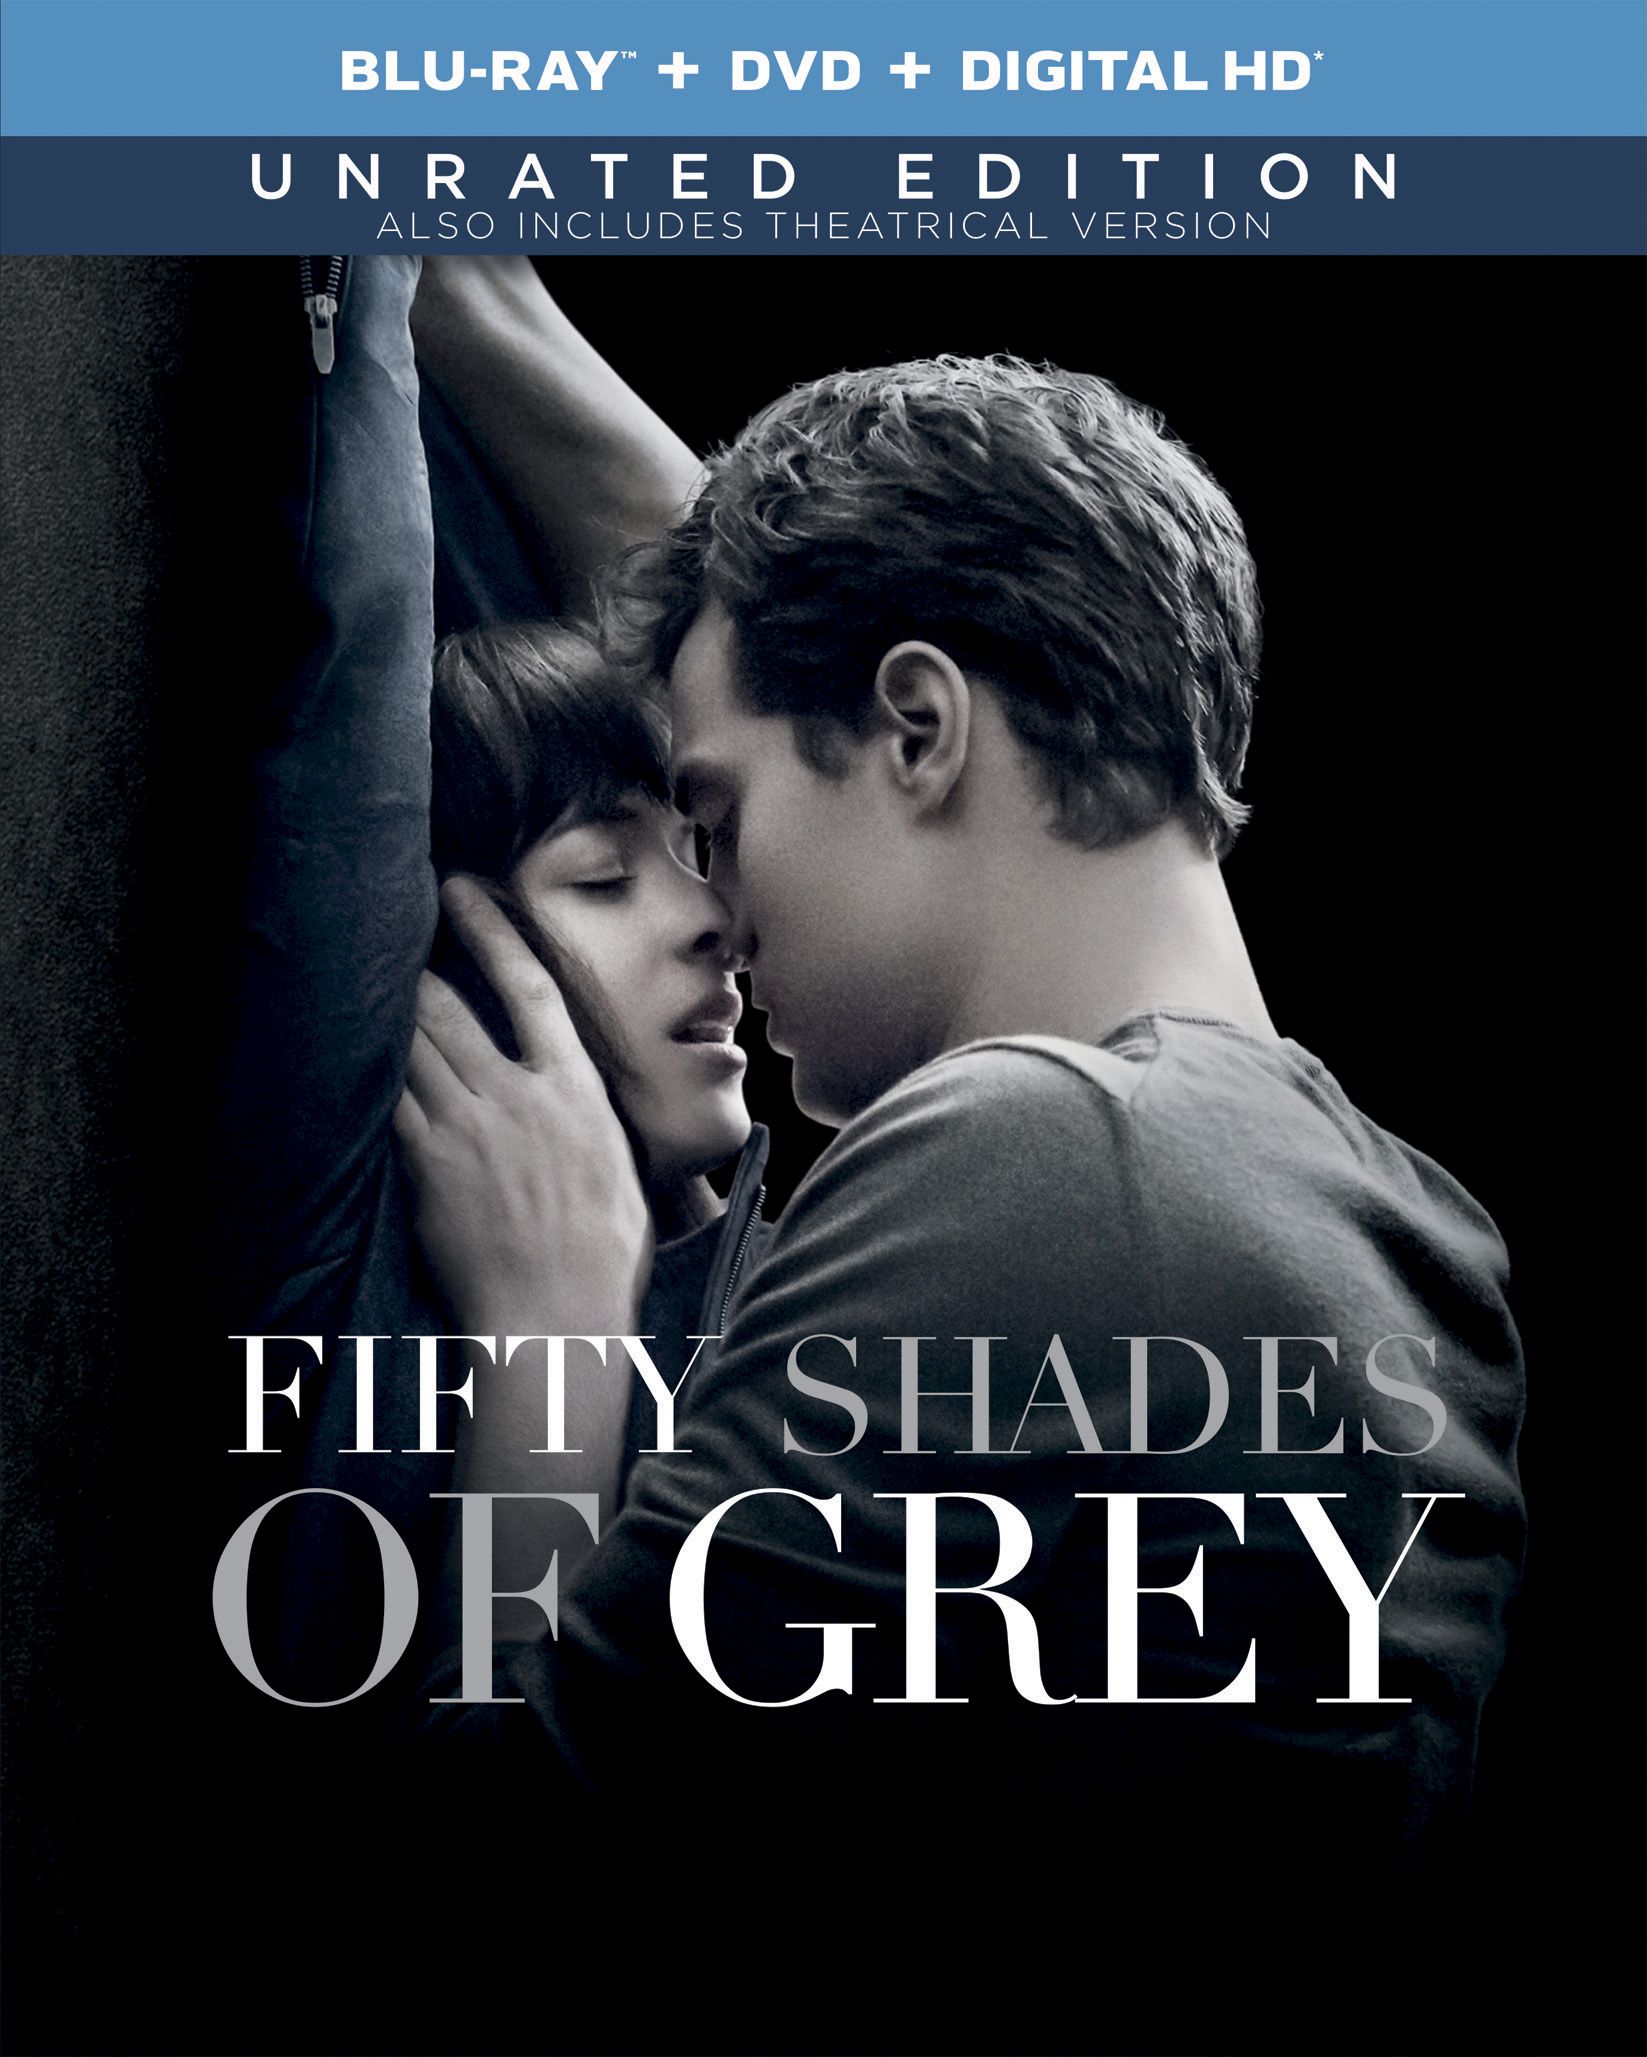 Fifty shades of grey hindi dubbed full movie download